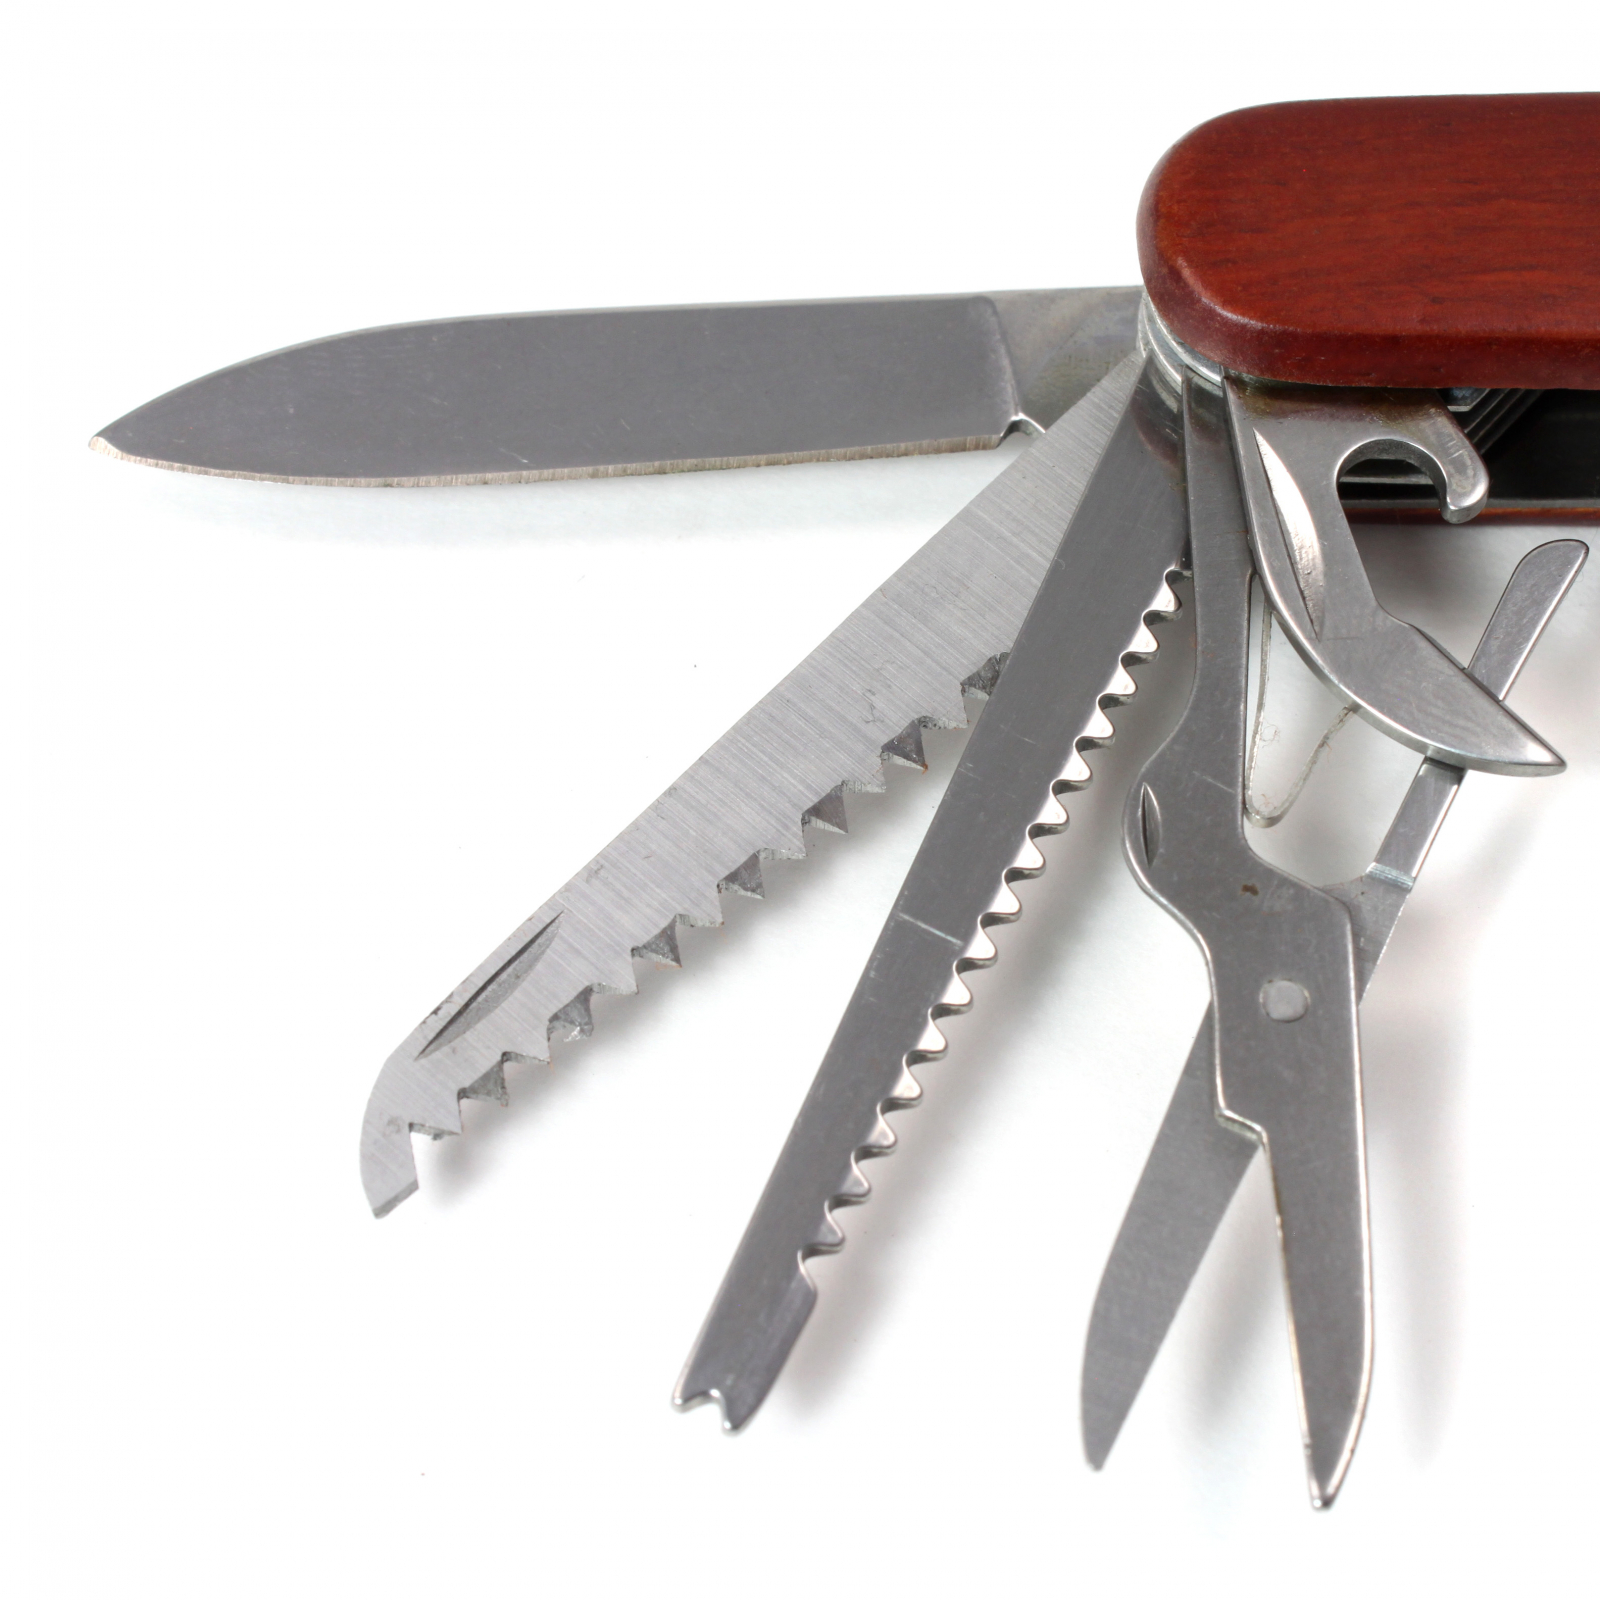 ASR Outdoor 3.5 Inch Compact 14 in 1 Folding Pocket Utility Knife Multi Tool with Wood Body - image 3 of 7